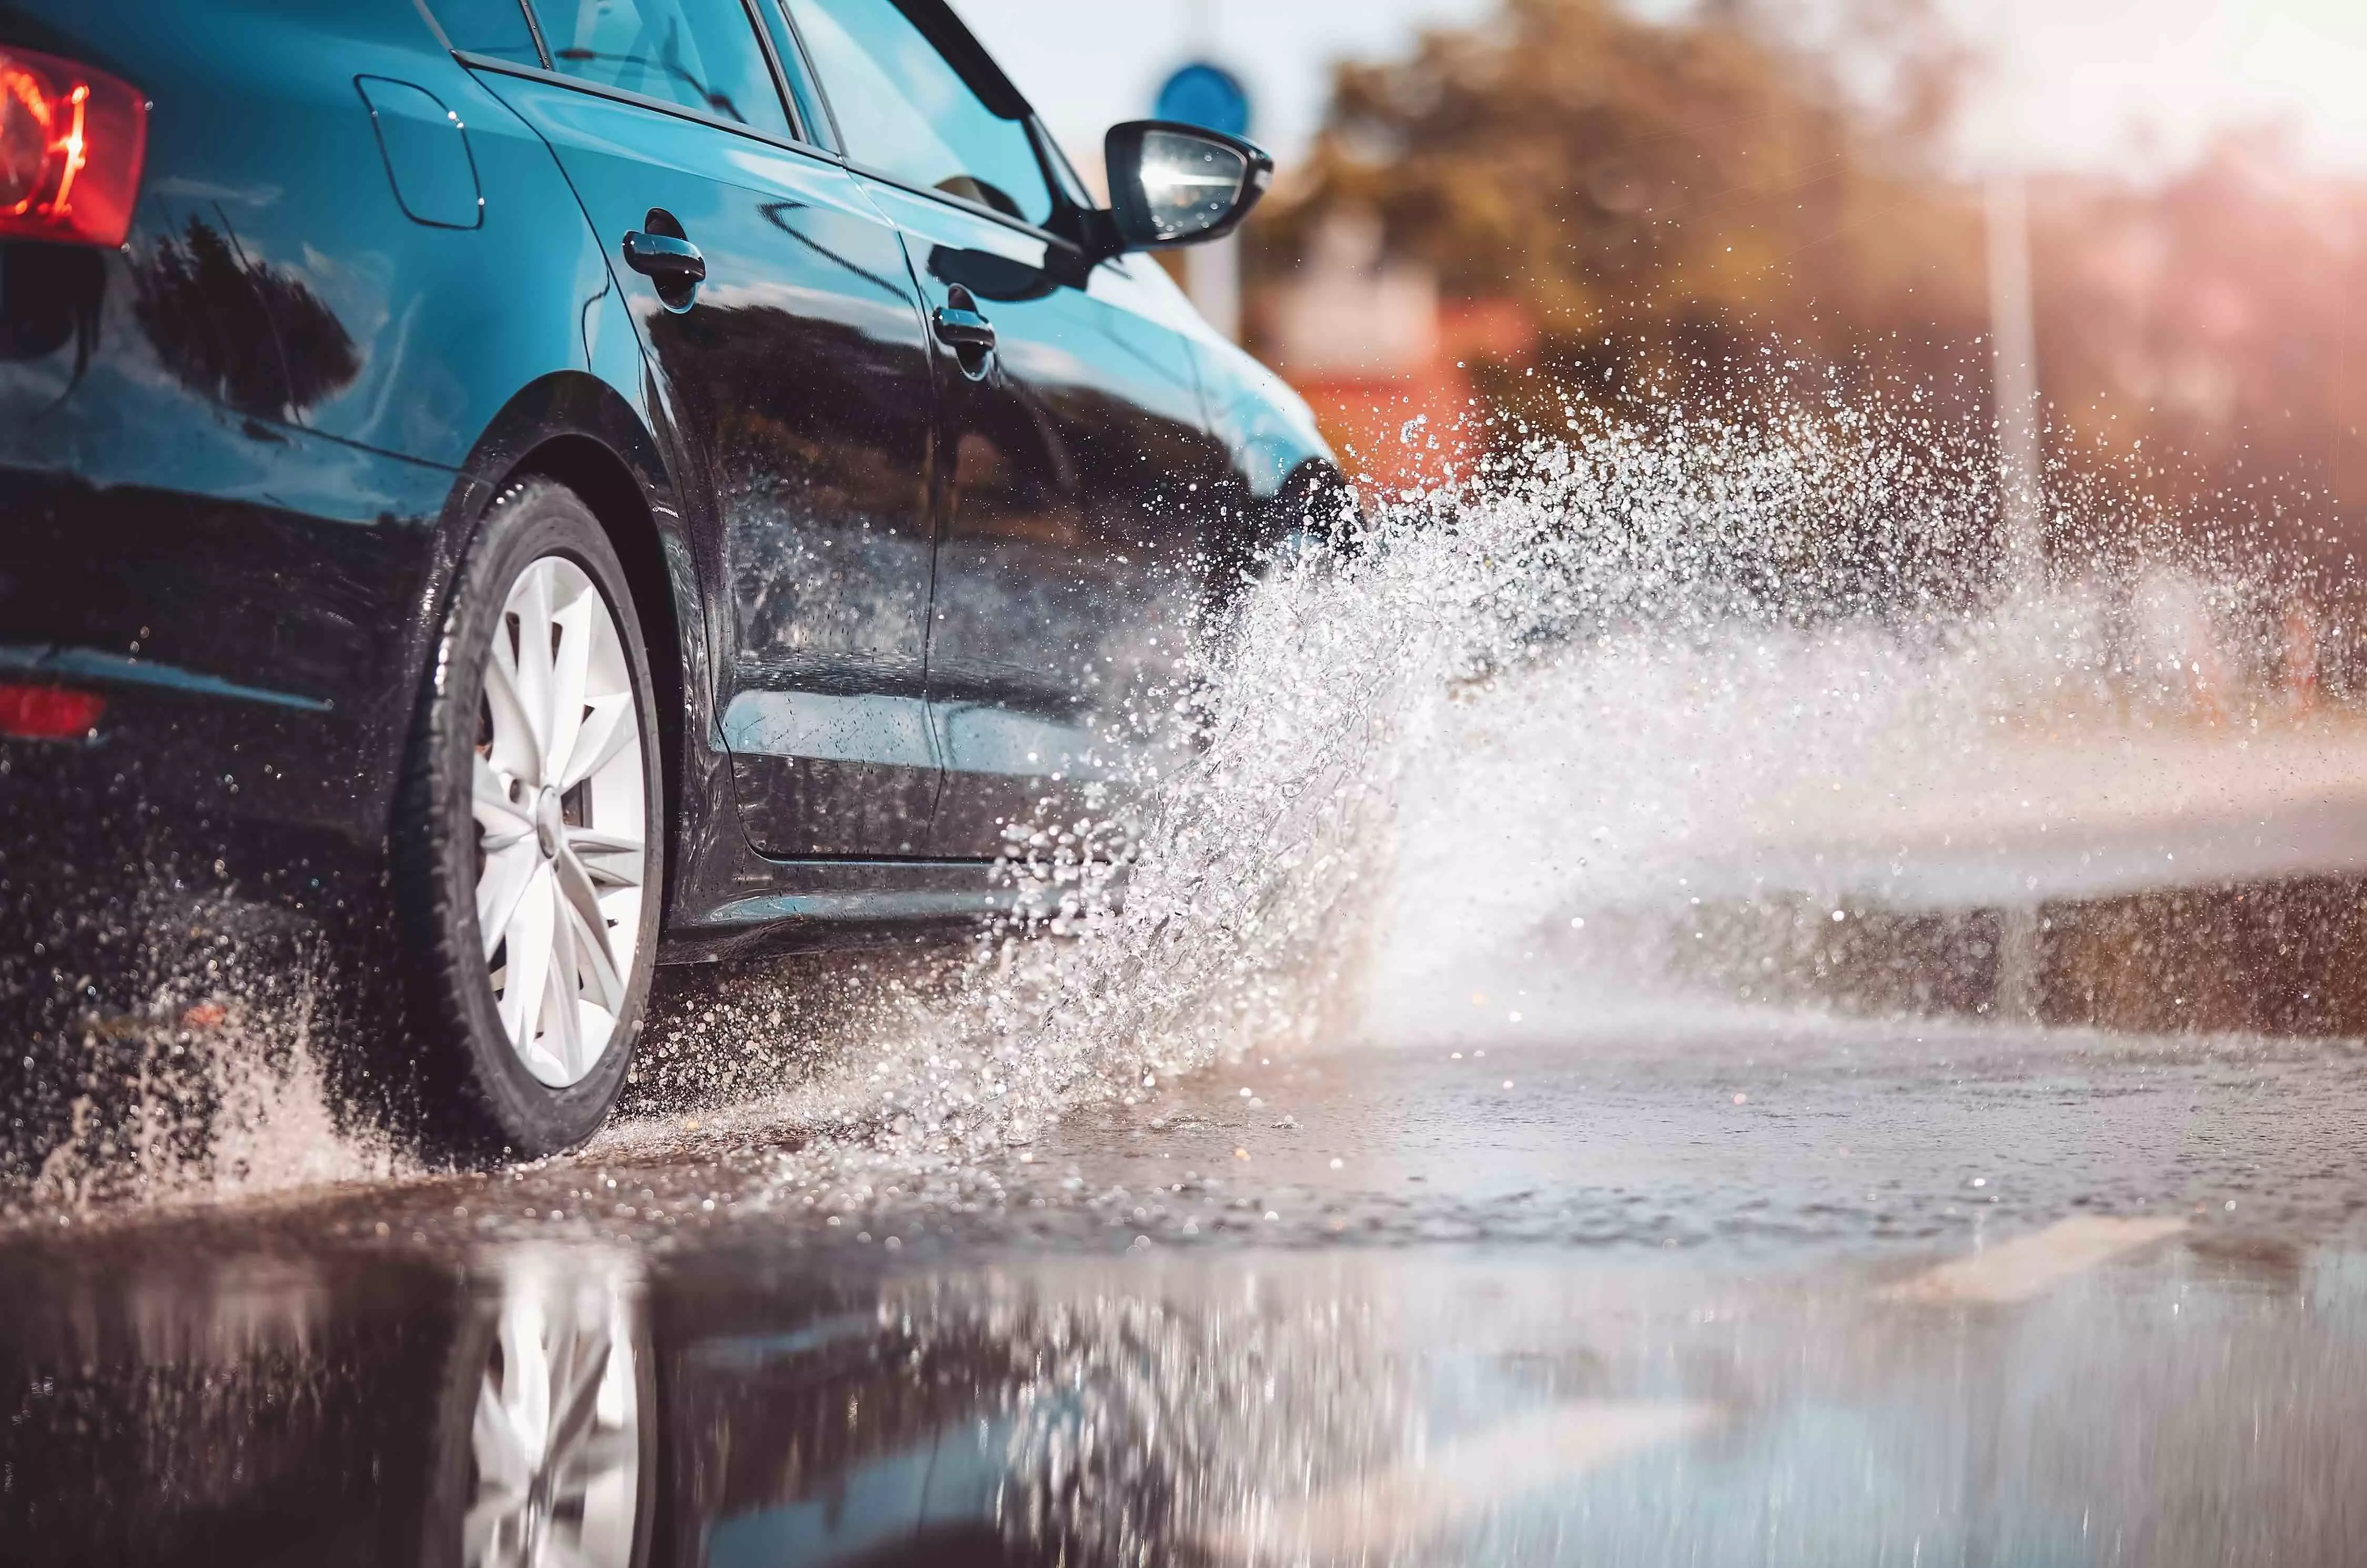 Driving through water: is it safe to do so?